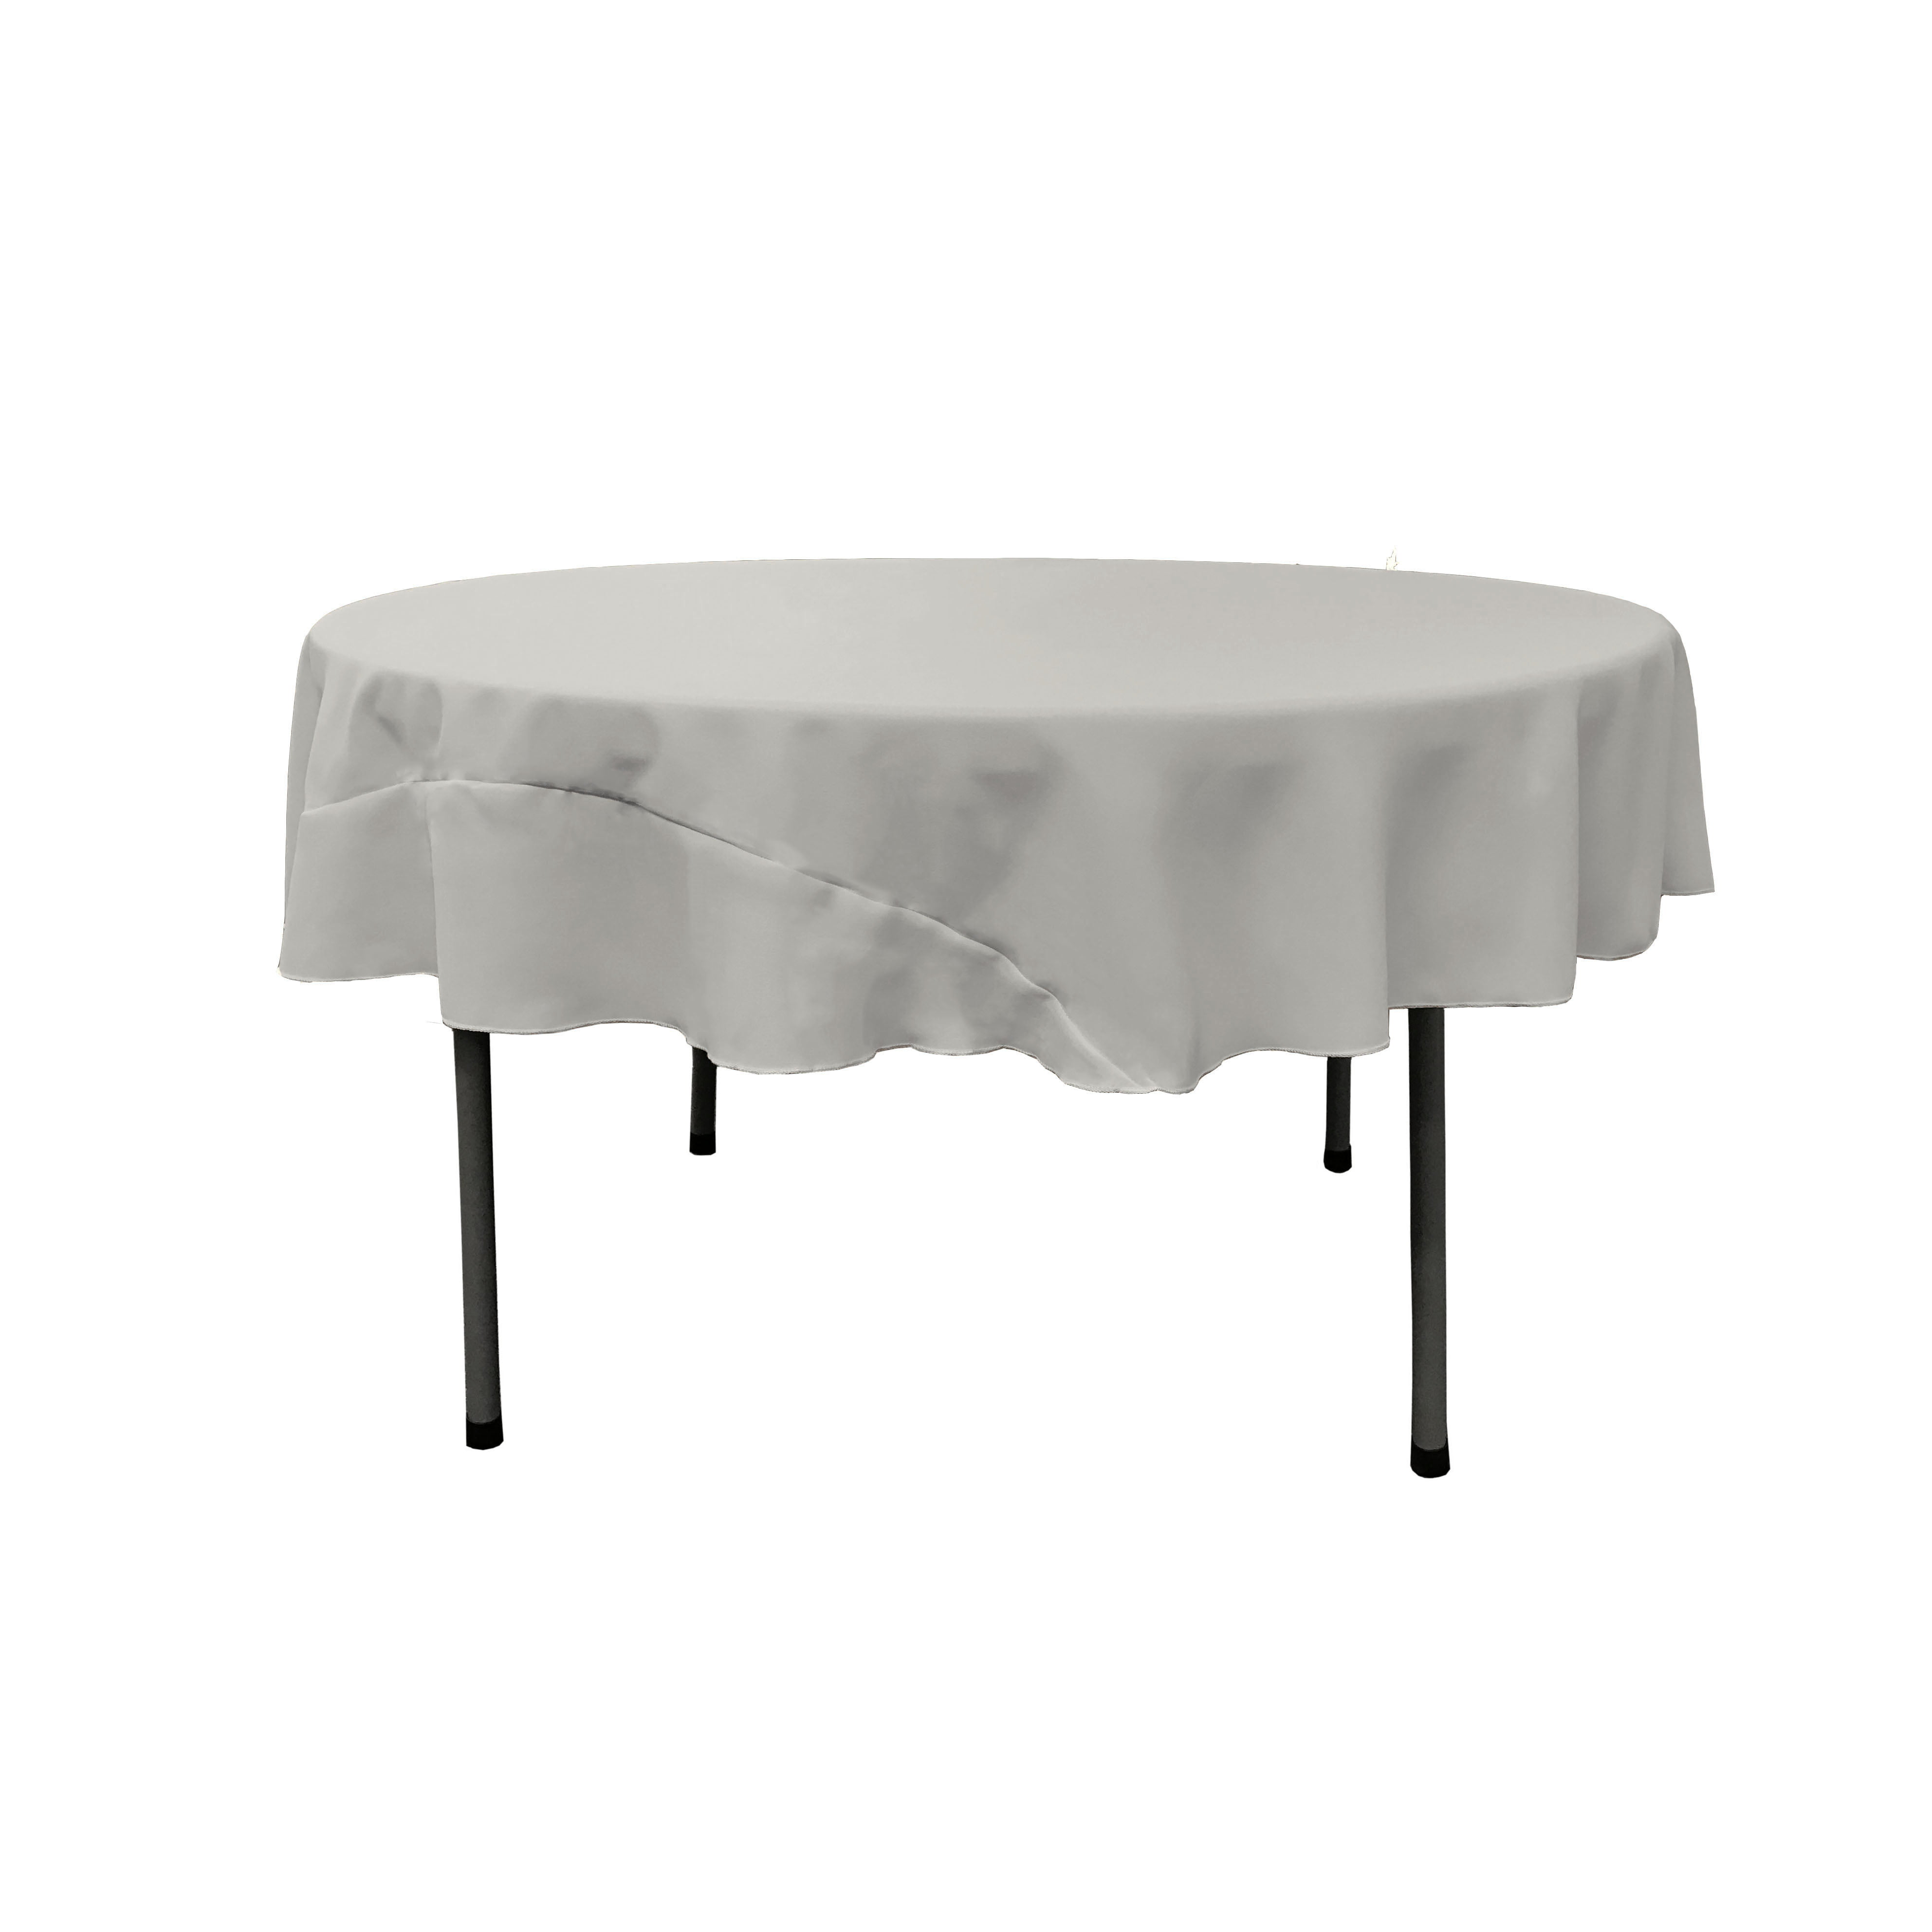 La Linen Polyester Poplin Tablecloth 72, Linen For 72 Inch Round Table